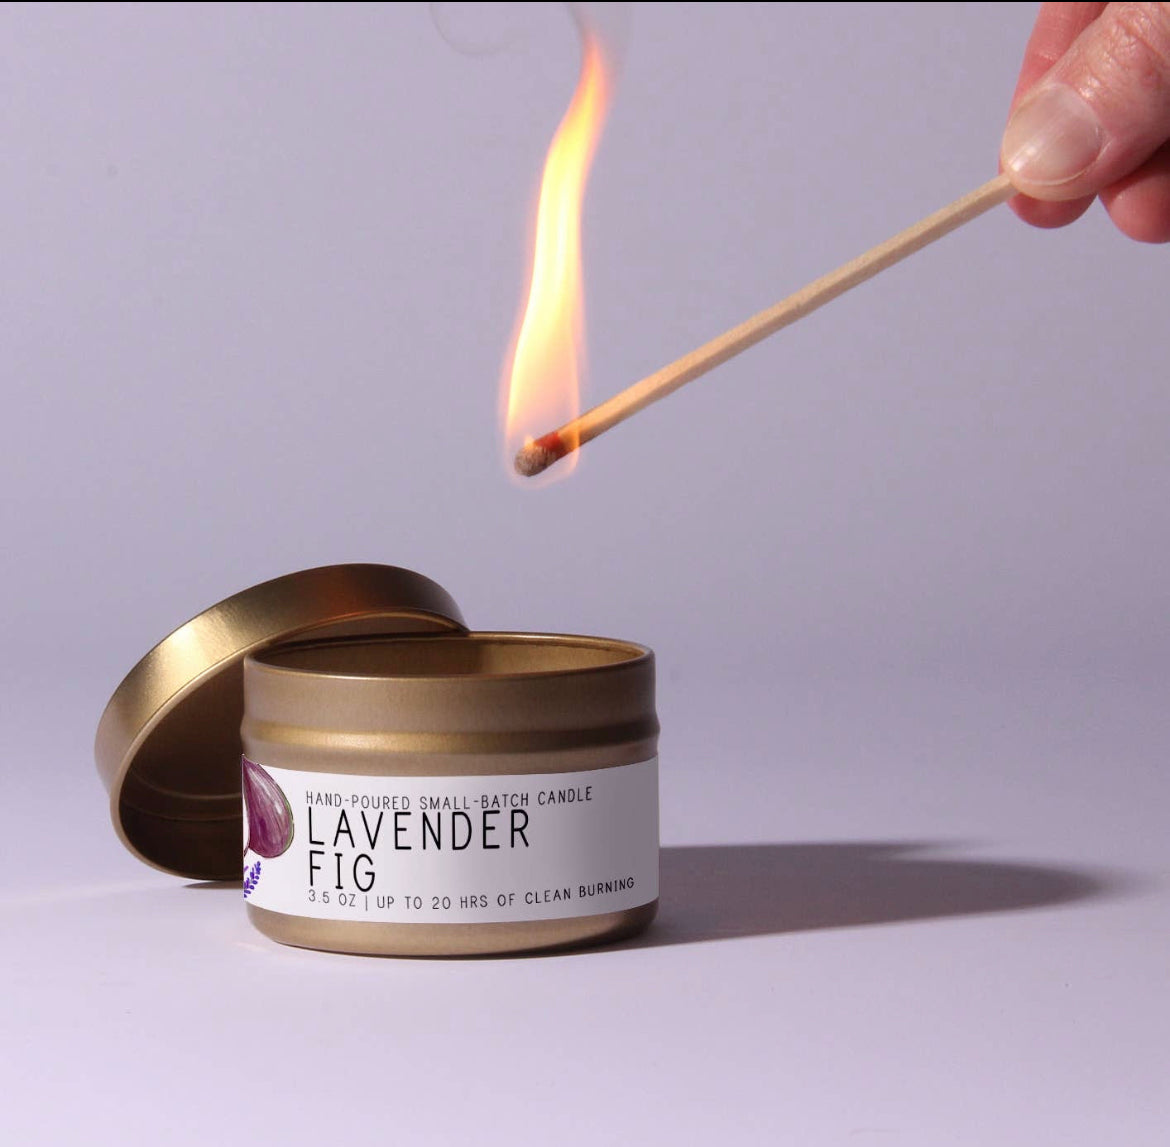 Lavender FigTin Candle